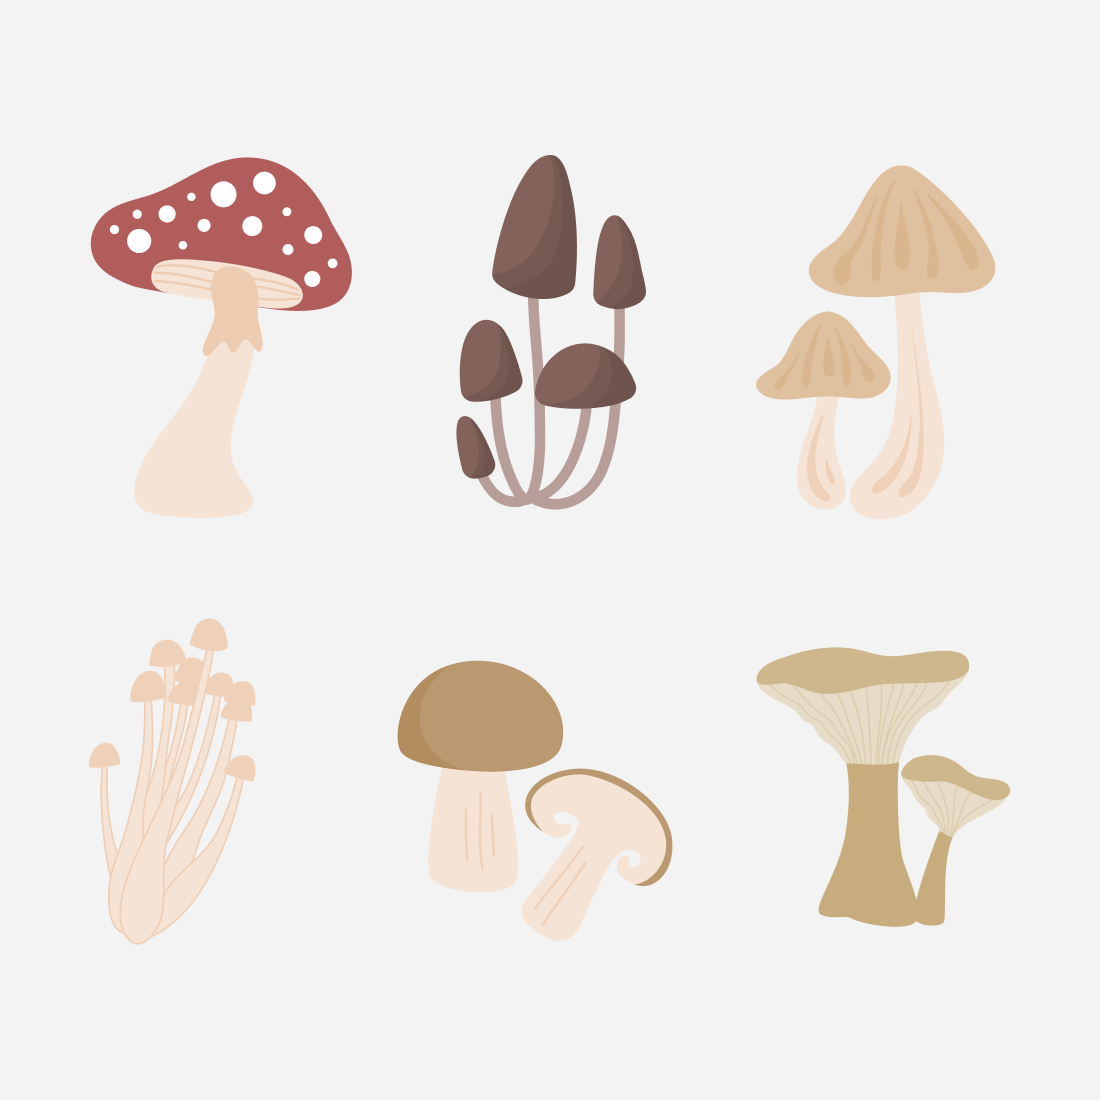 Edible and Poisonous Mushrooms.